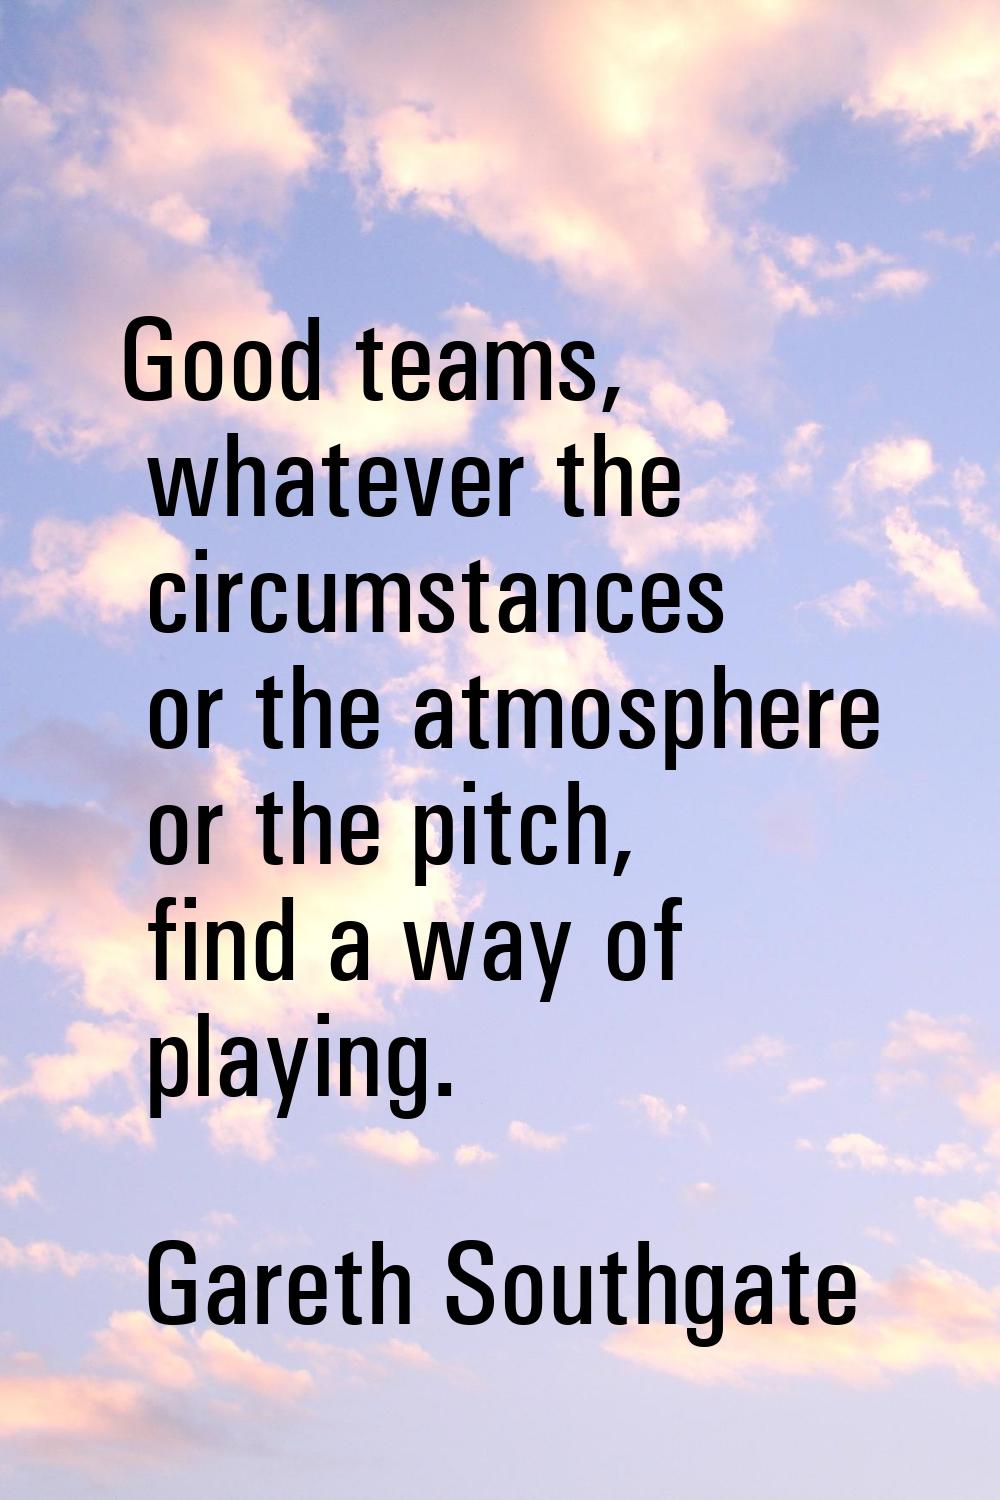 Good teams, whatever the circumstances or the atmosphere or the pitch, find a way of playing.